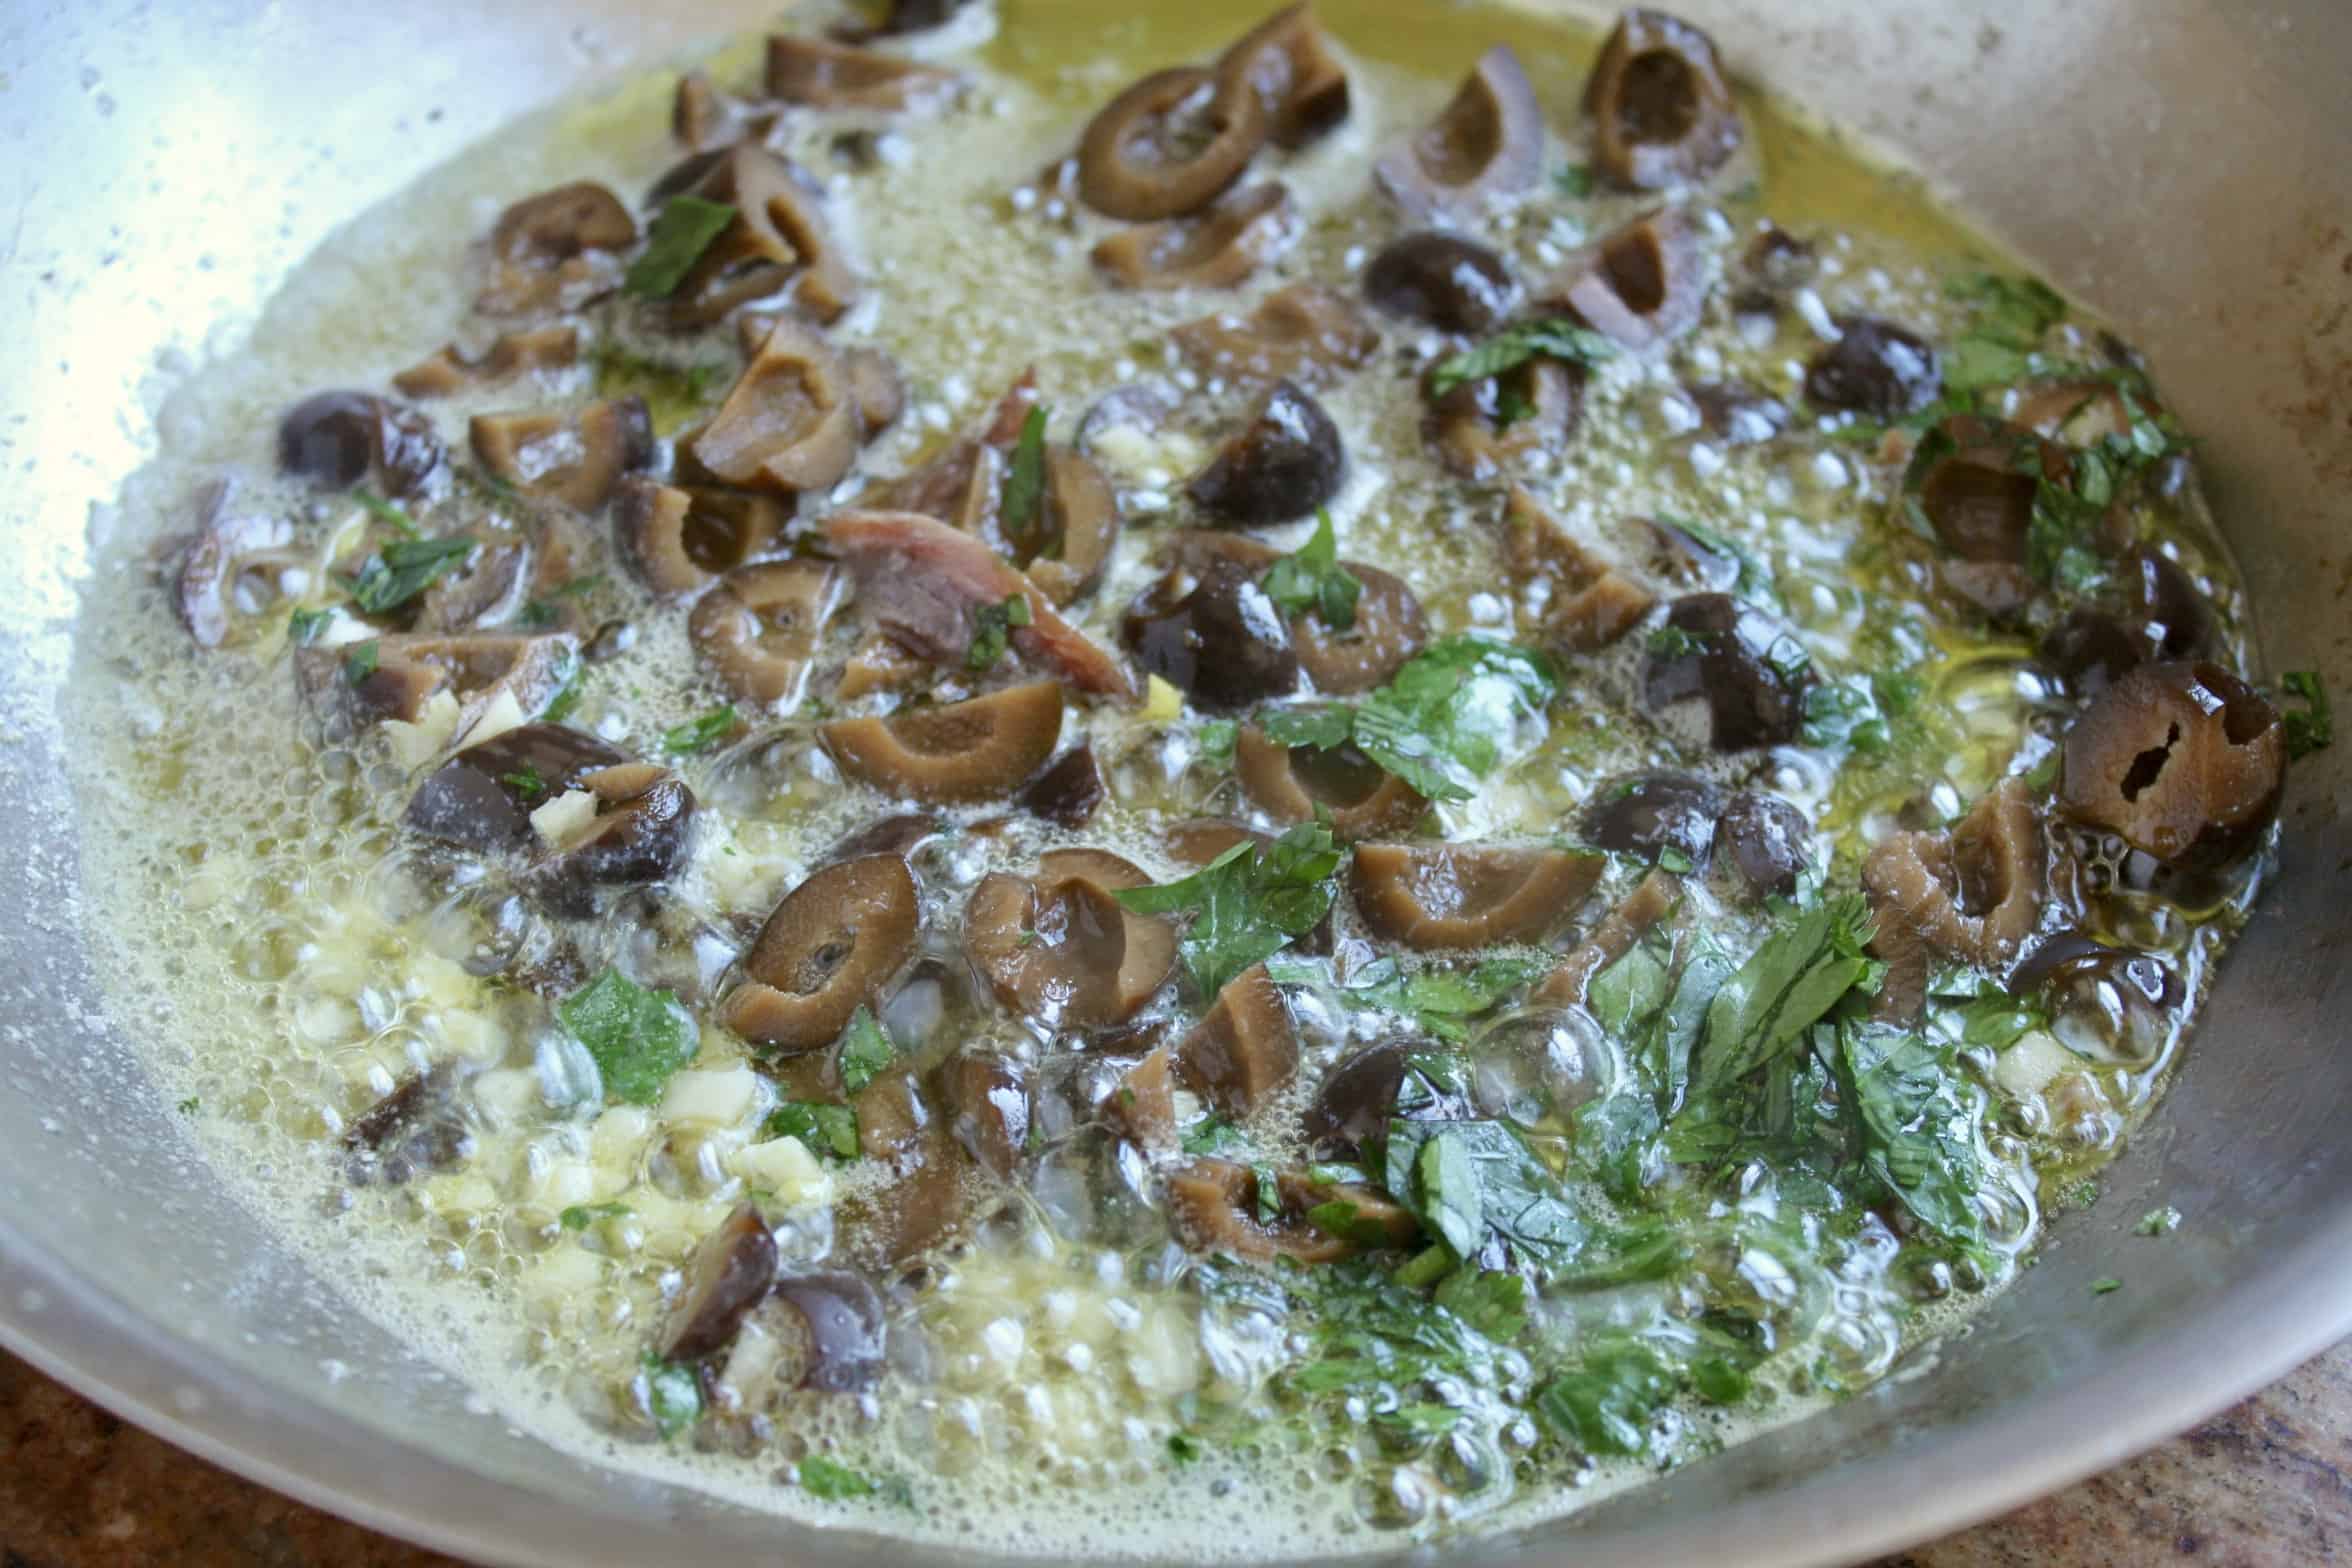 making sauce with the black olives and anchovy